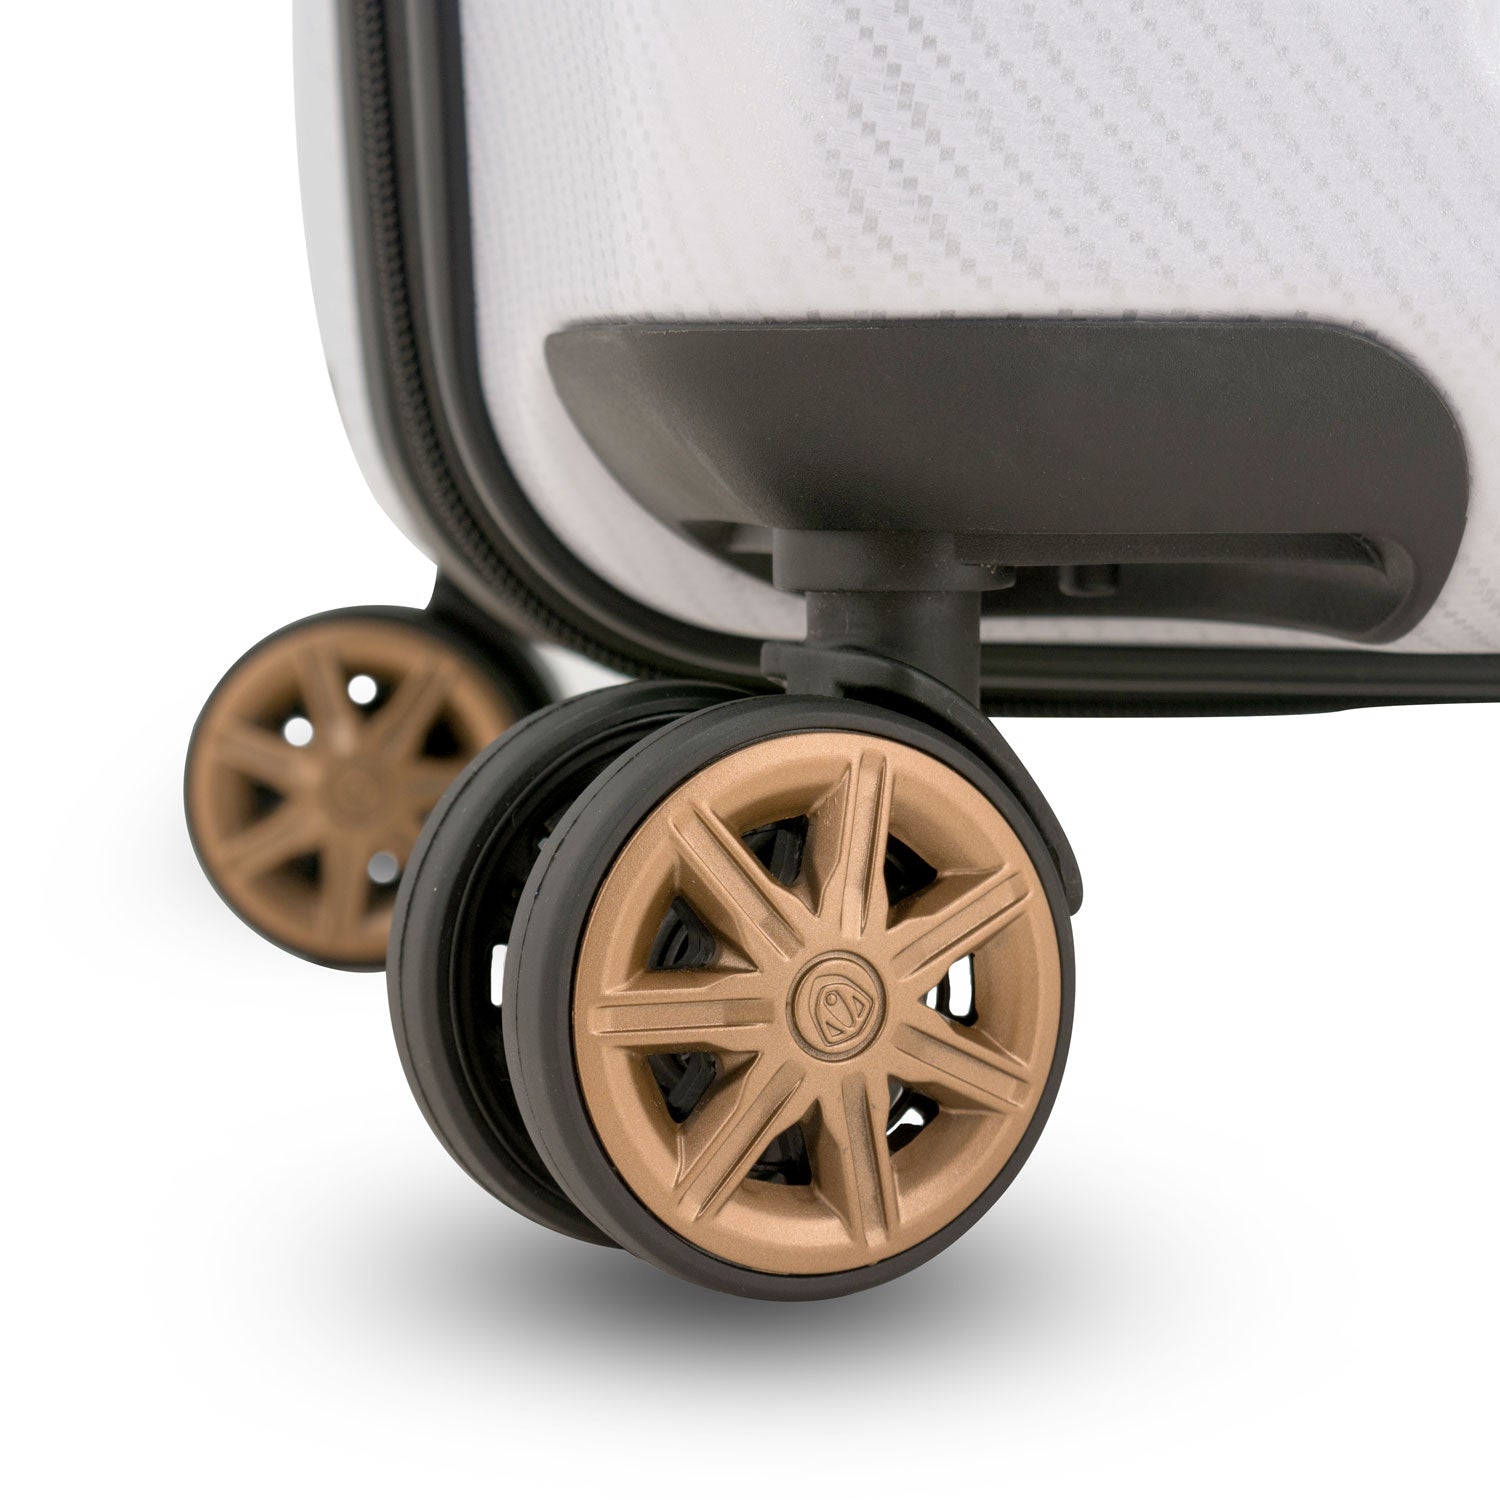 An image of a golden wheel on the white trunk luggage.